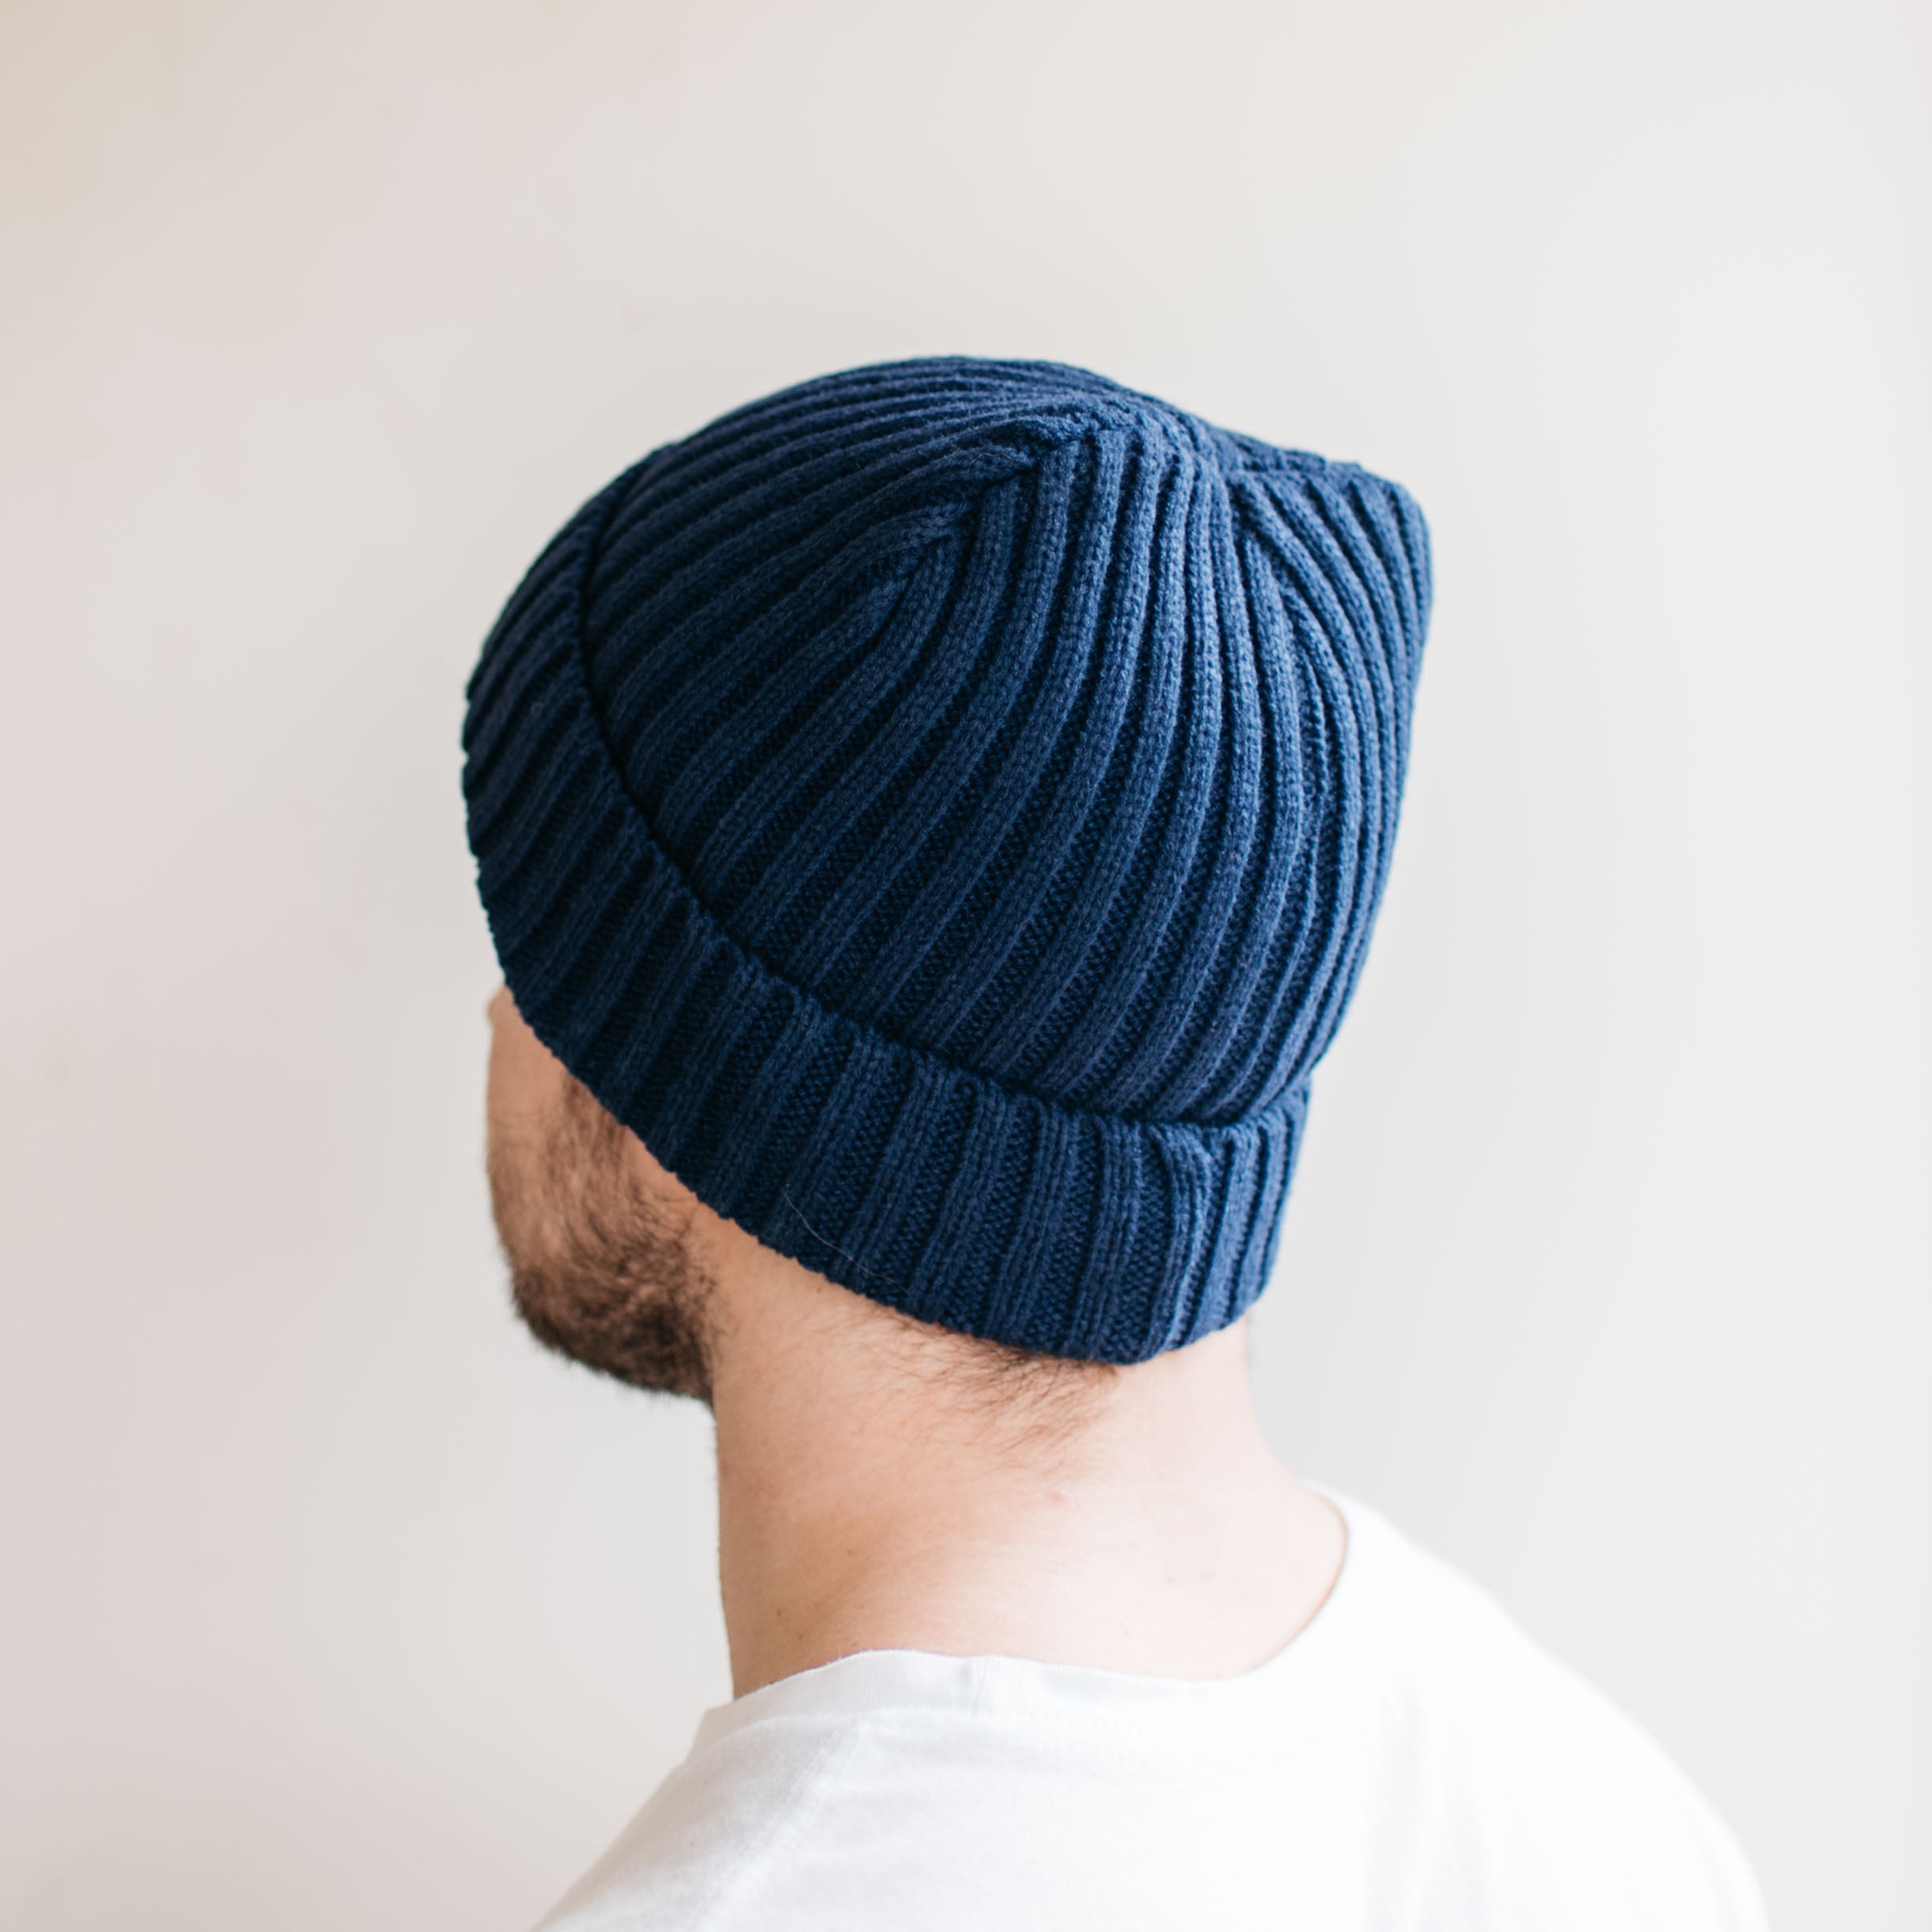 The Wilderness Beanie - Stokedthebrand. Lifestyle products for outdoor adventures. Made in South Africa